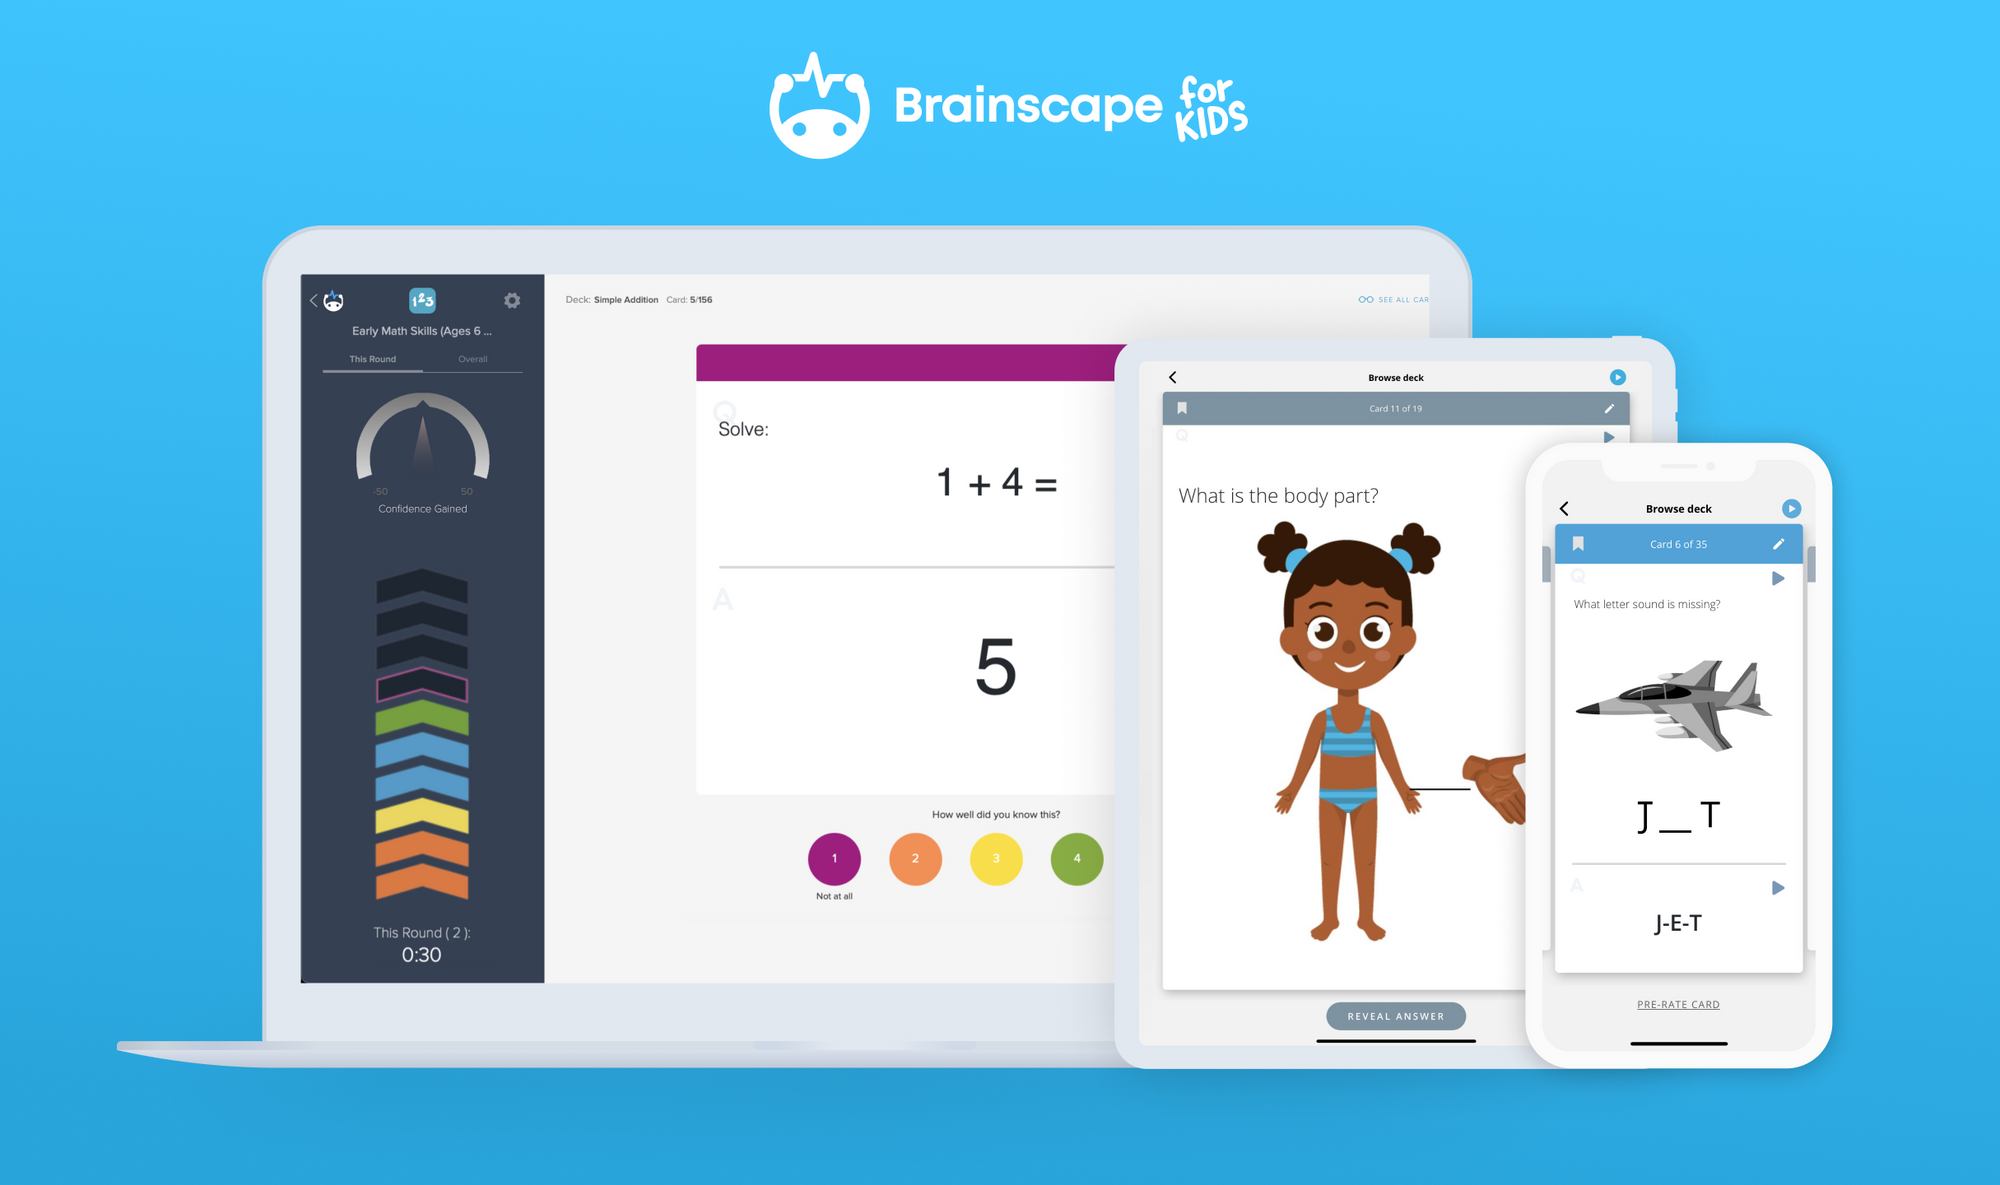 Brainscape's flashcards for young kids